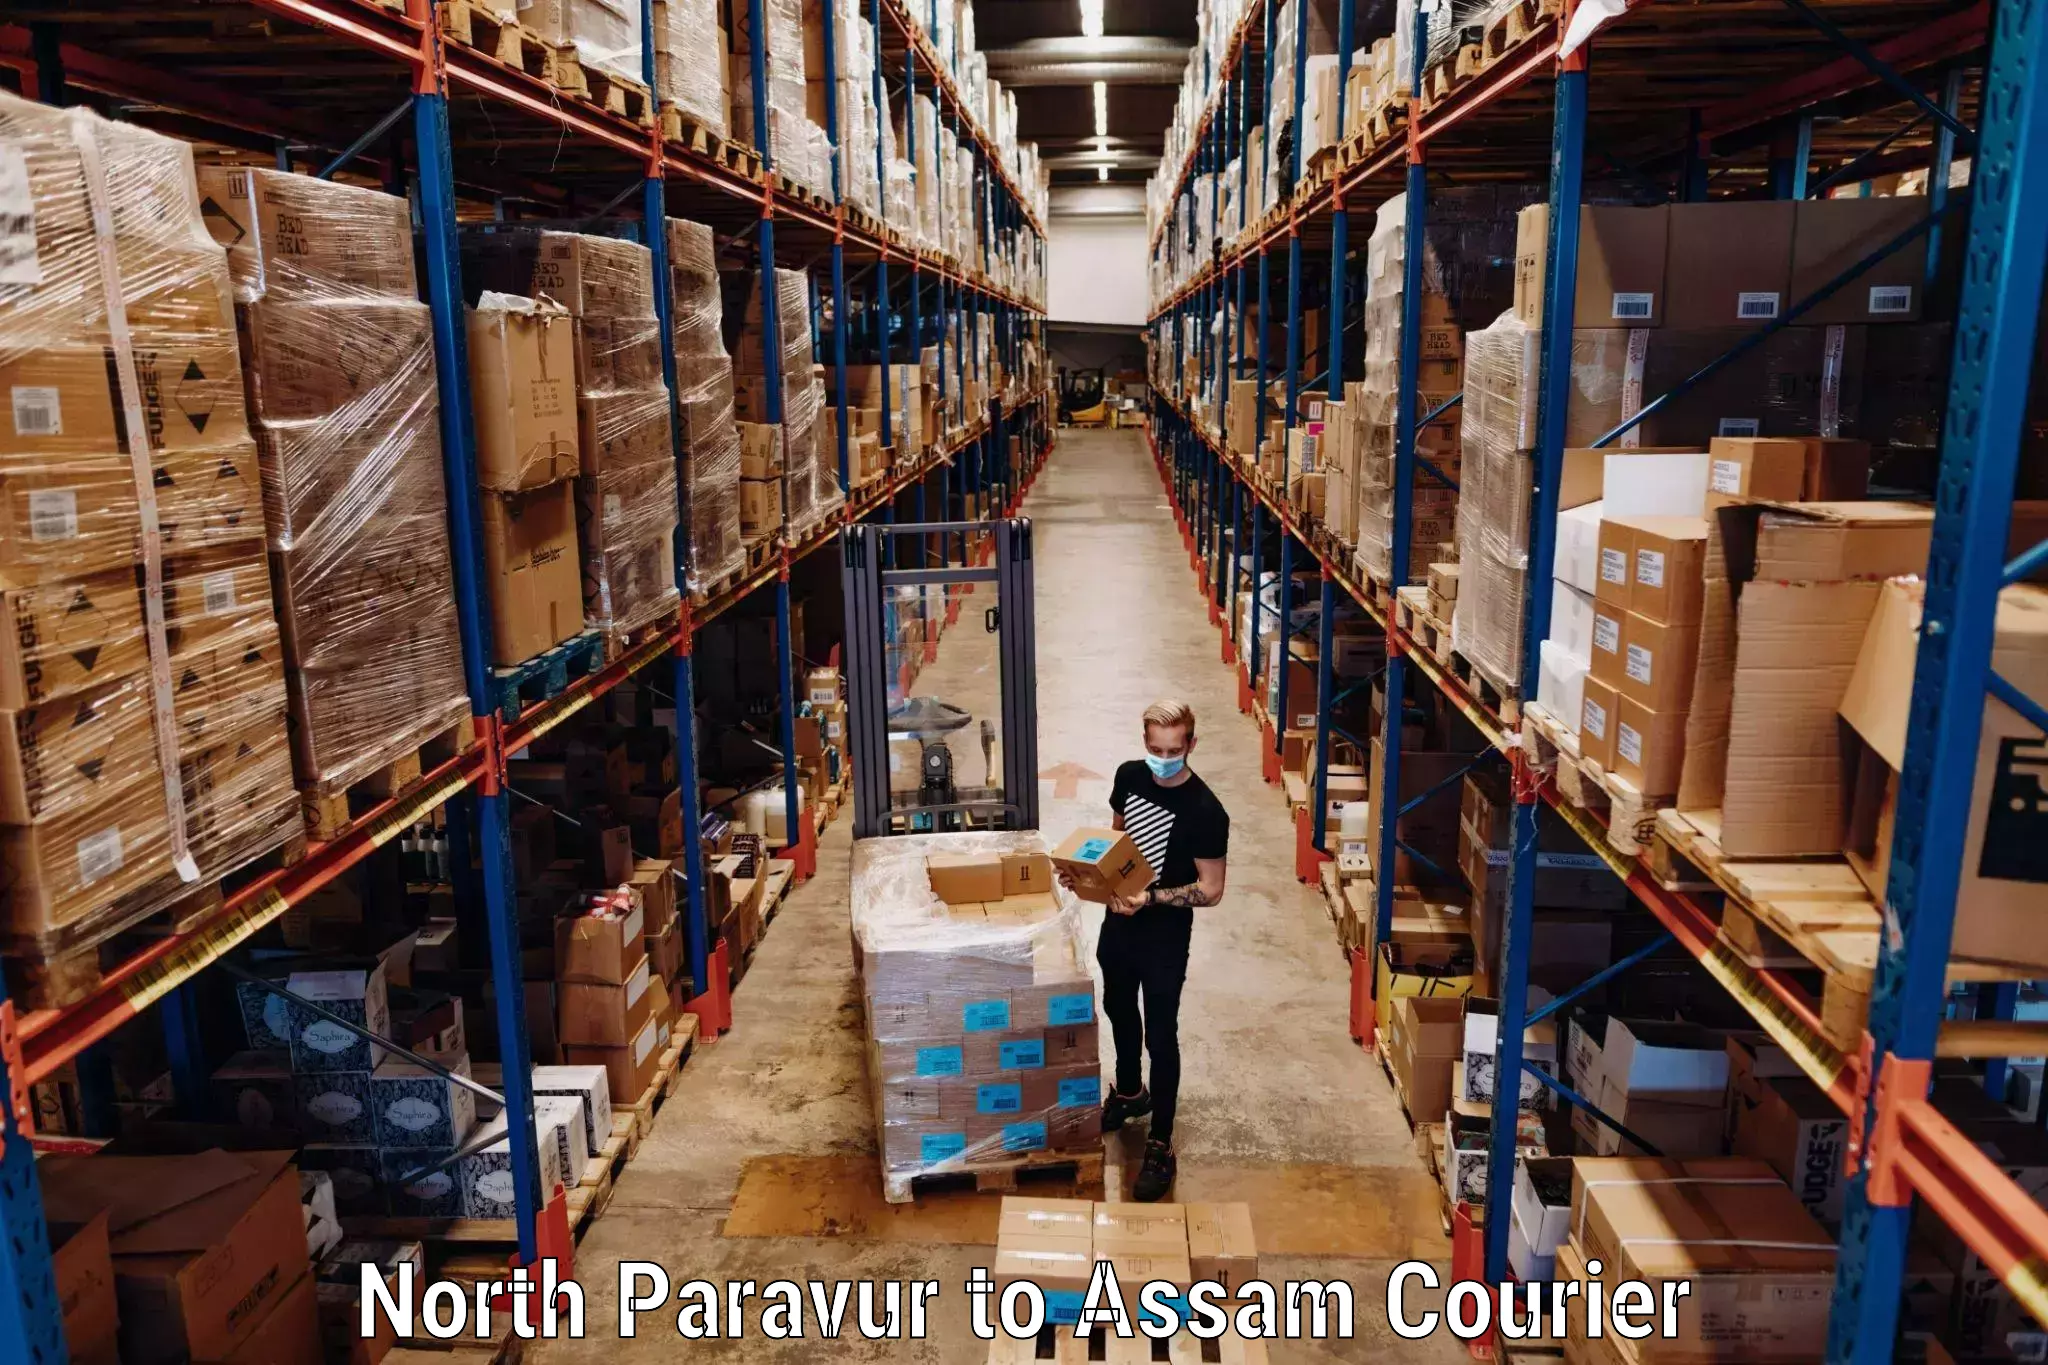 Baggage shipping schedule North Paravur to Dibrugarh